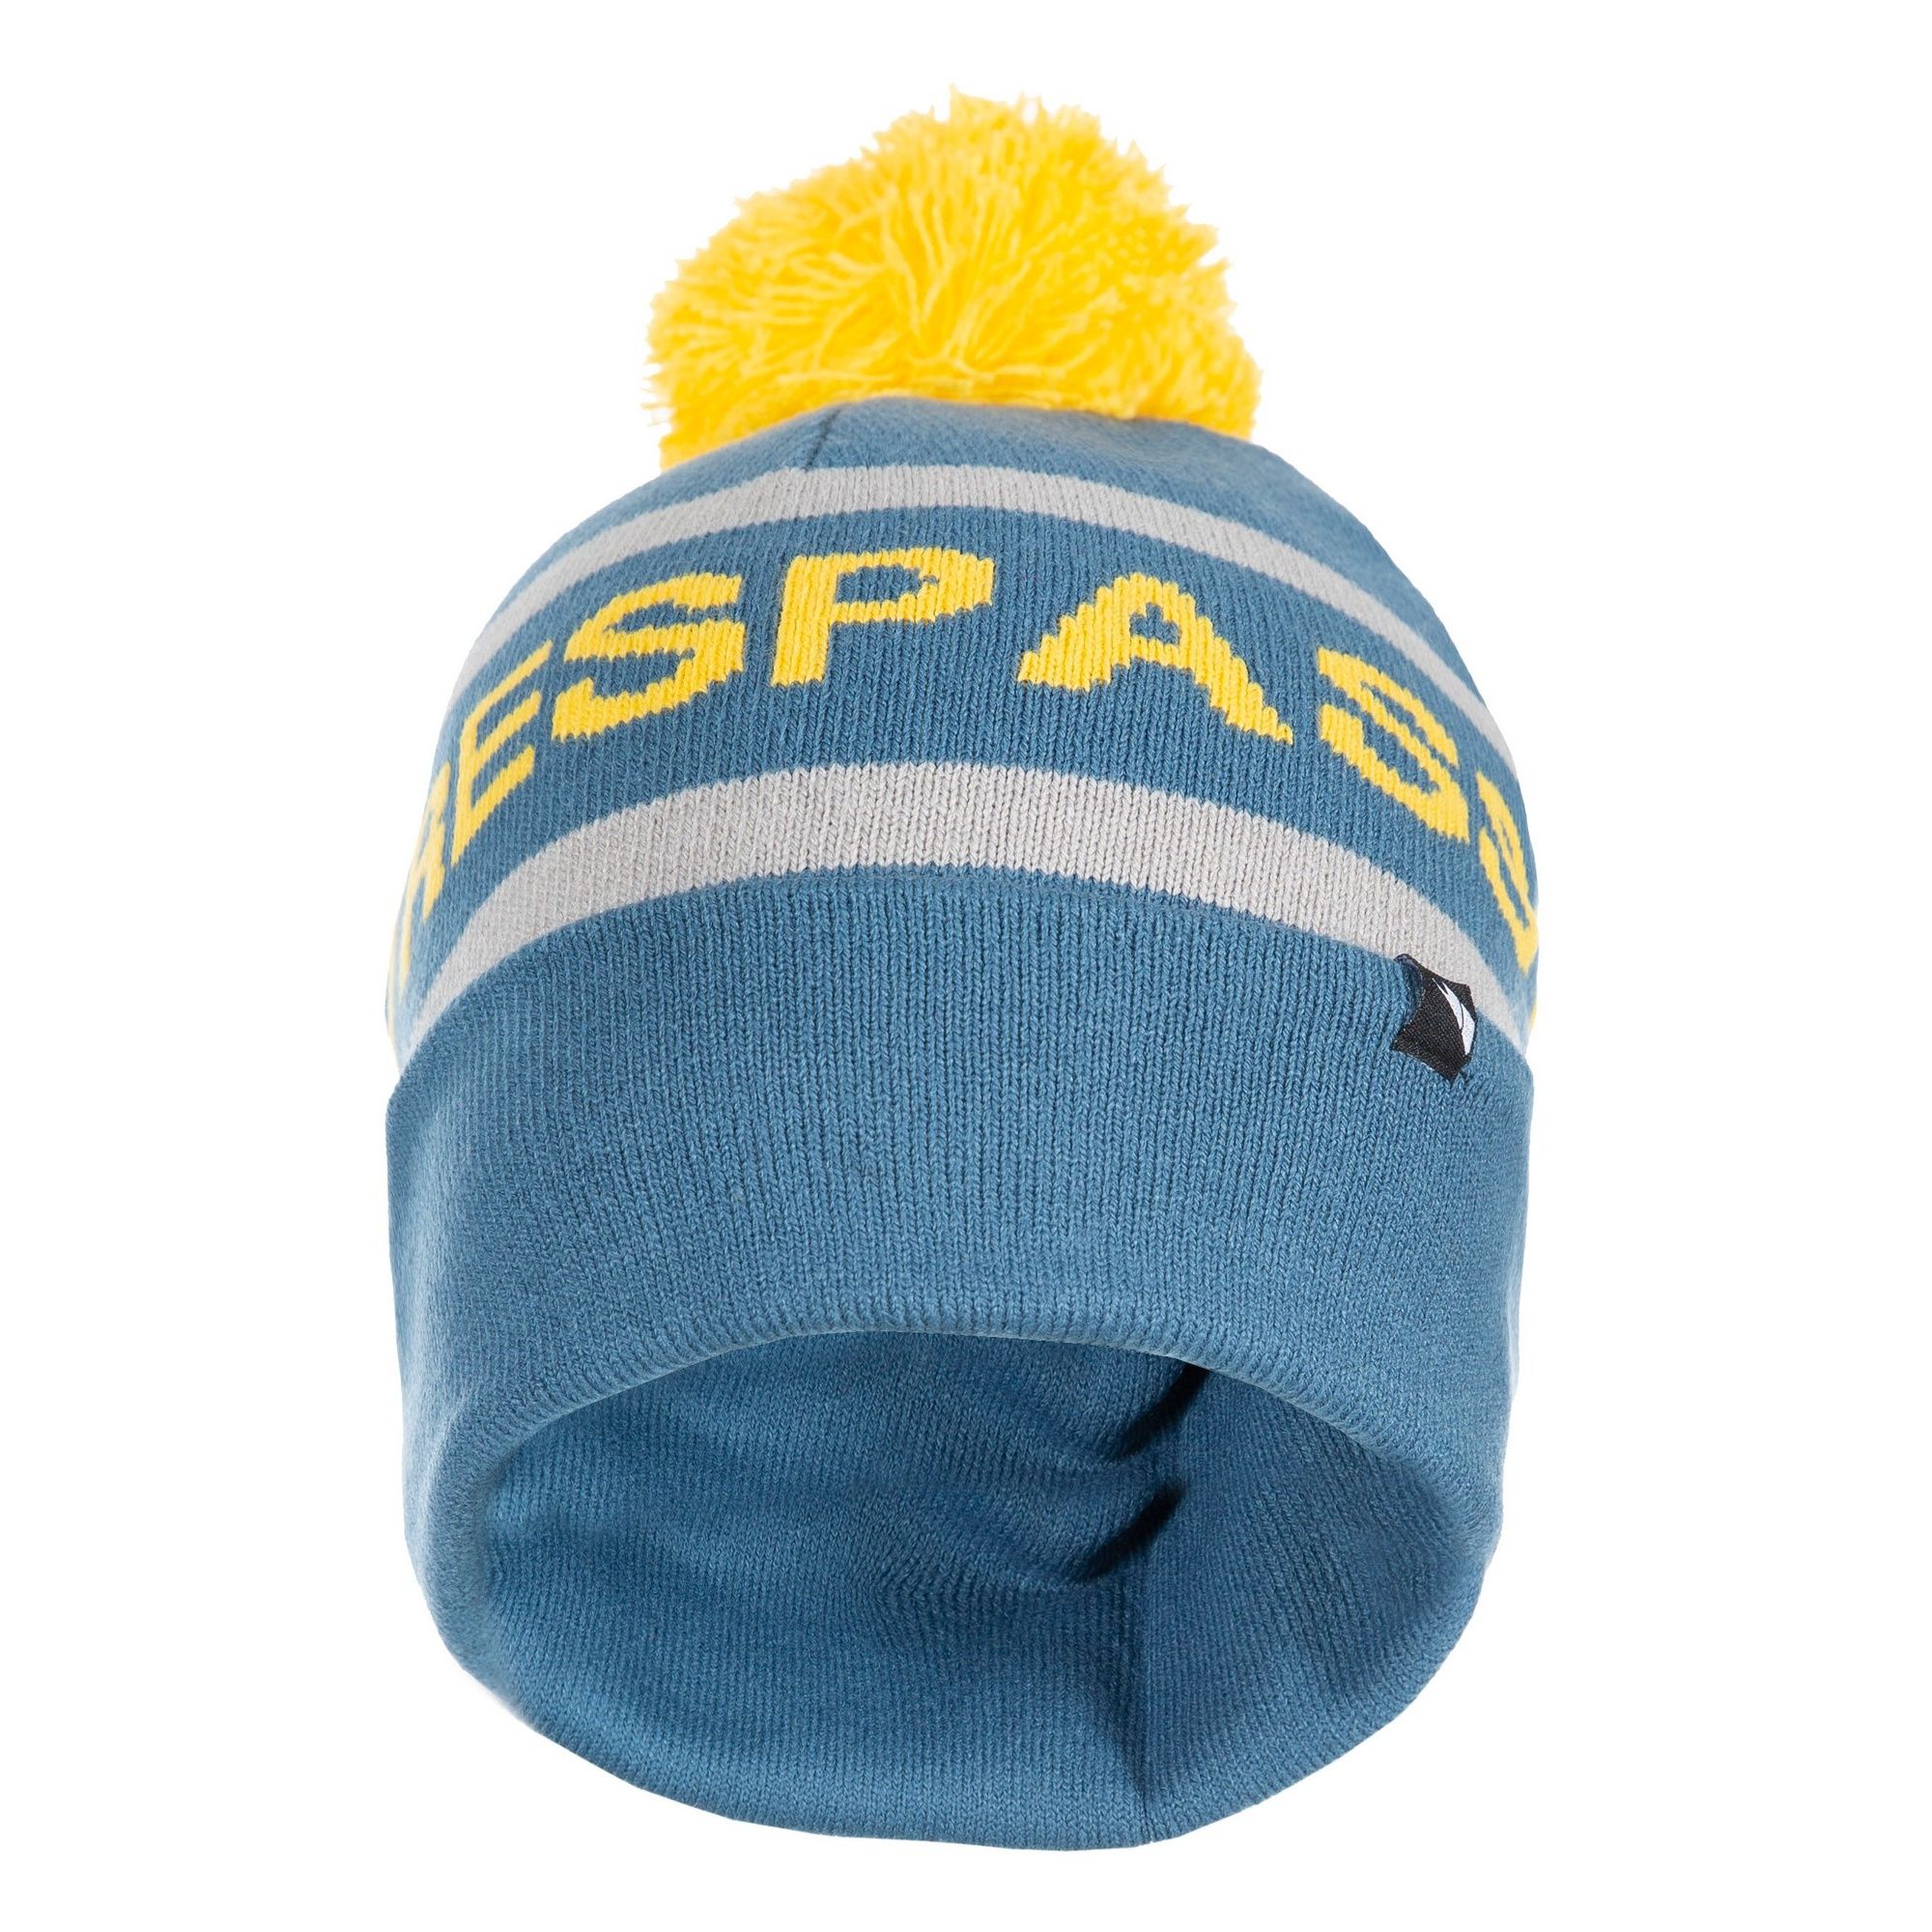 Knitted hat with bobble detail. Dual style - beanie and slouch options. Woven label. 100% acrylic.